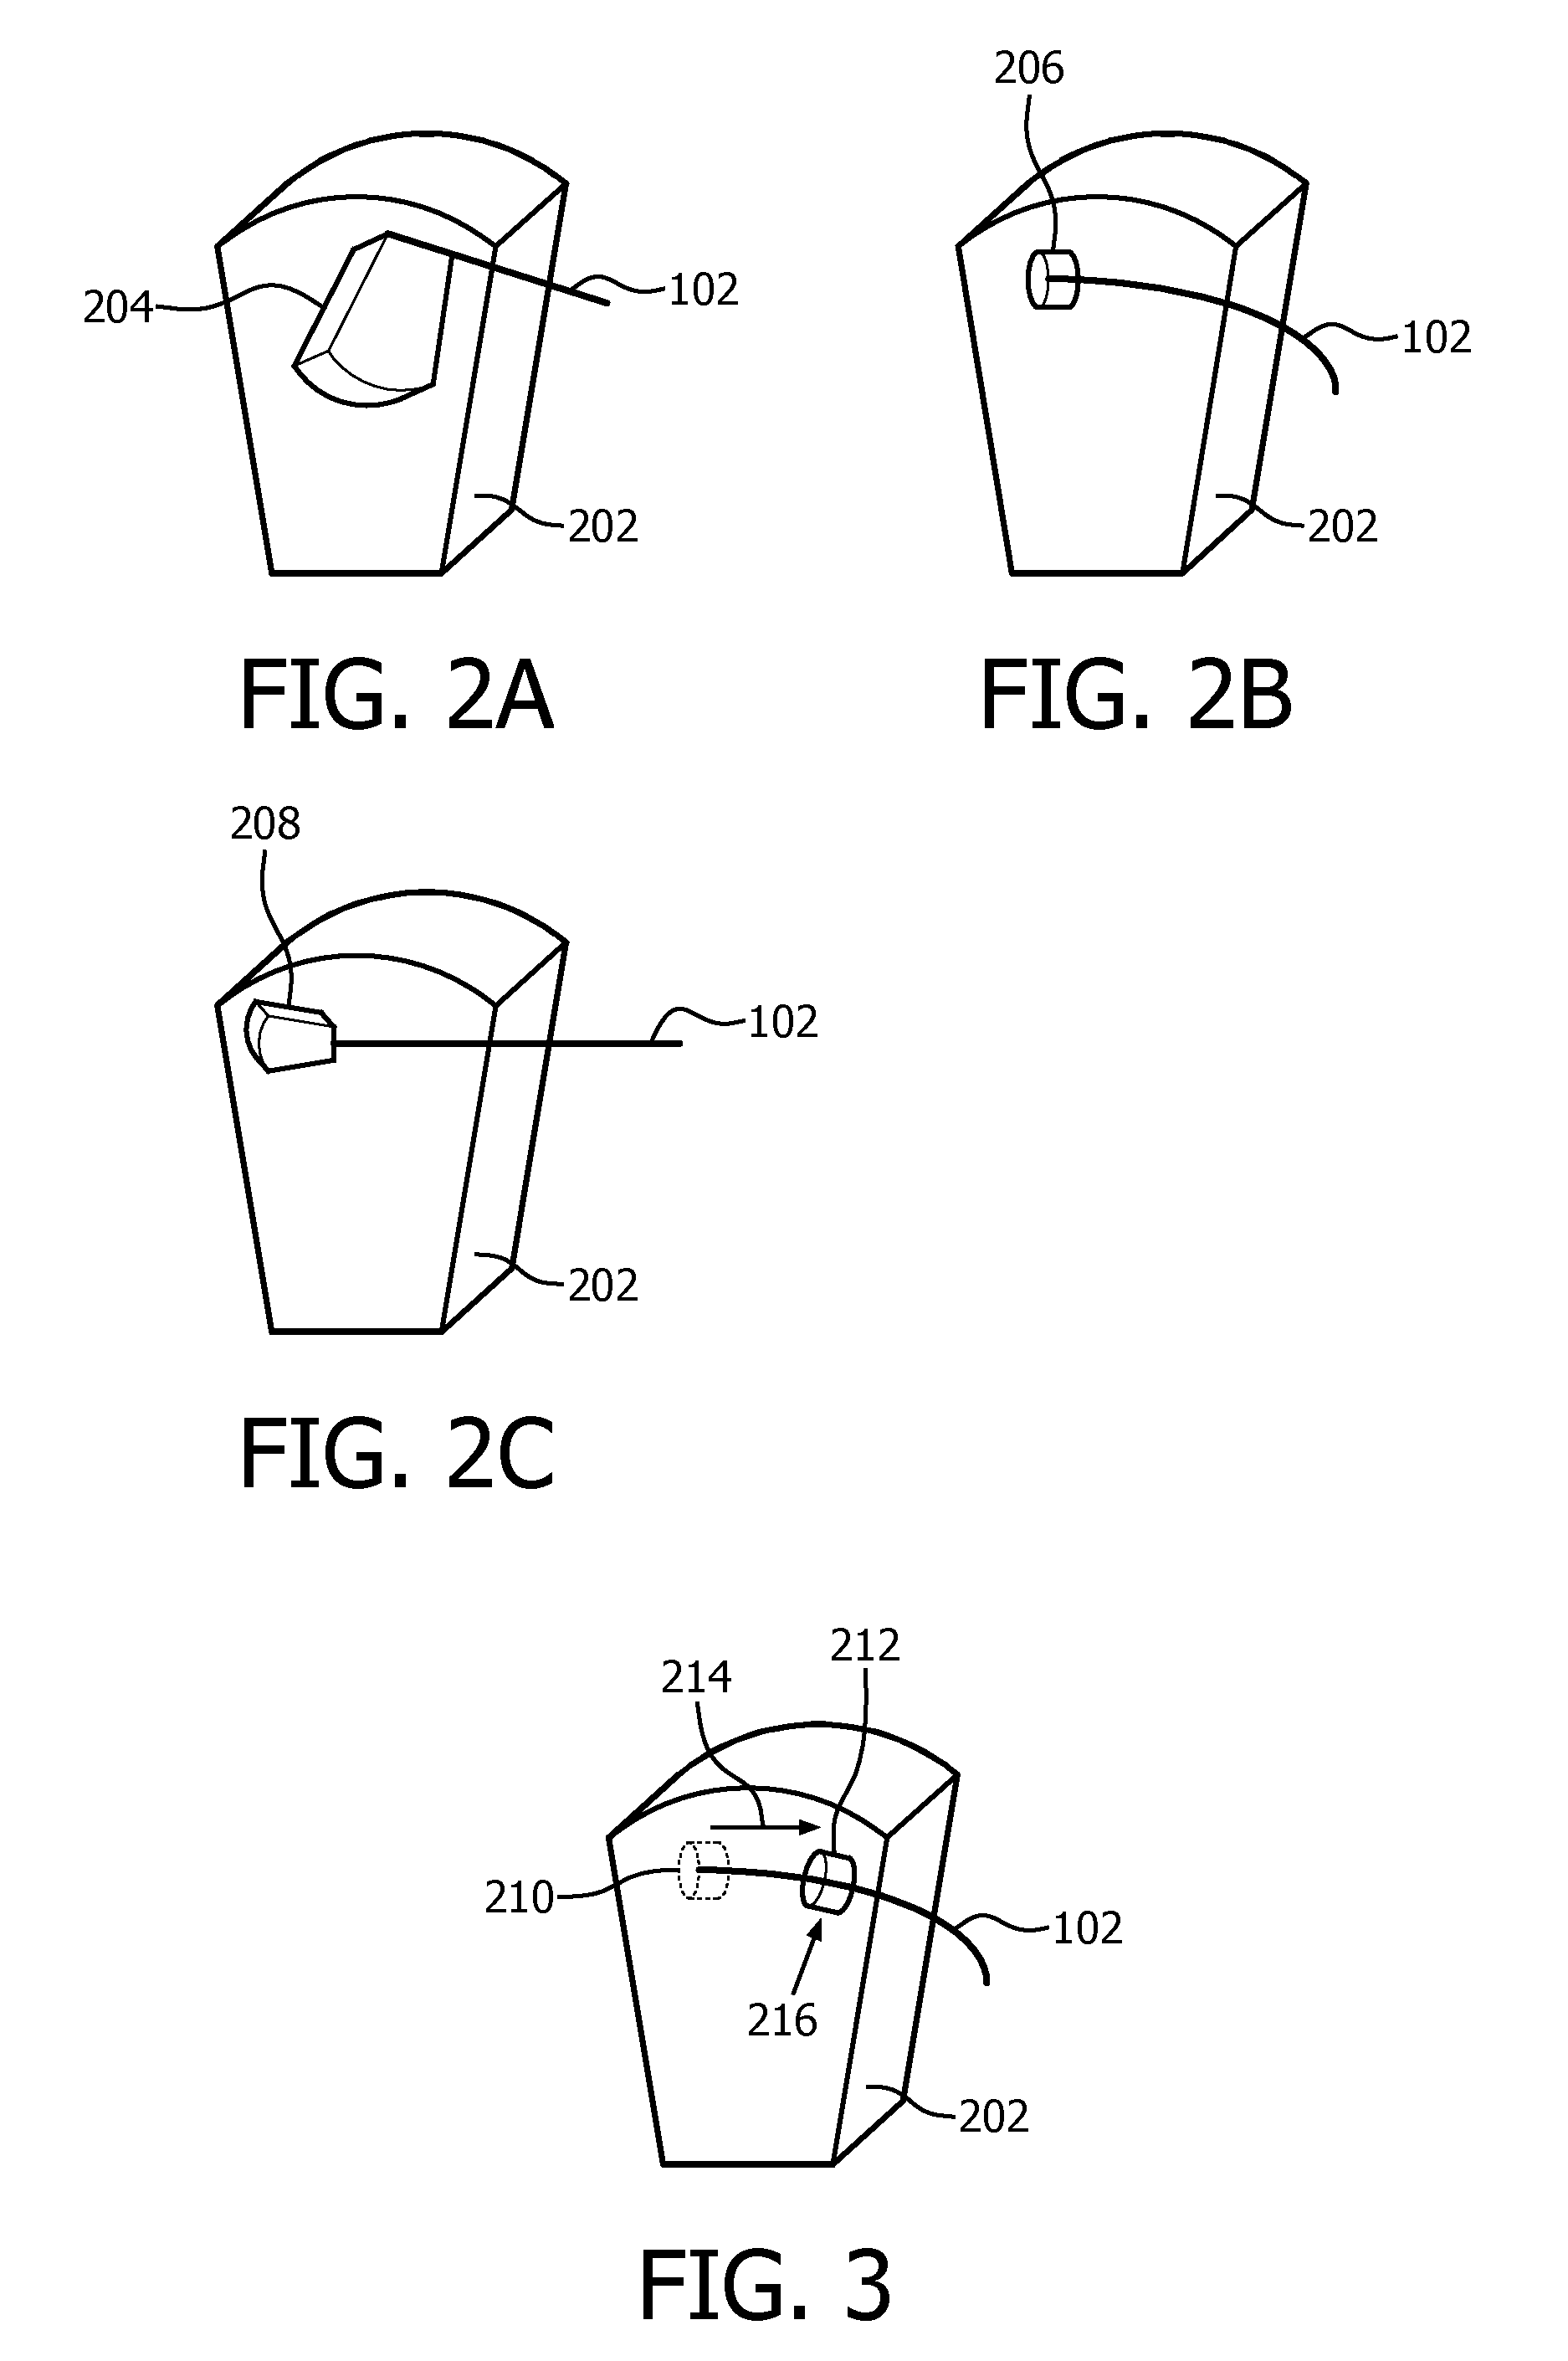 Virtual image with optical shape sensing device perspective